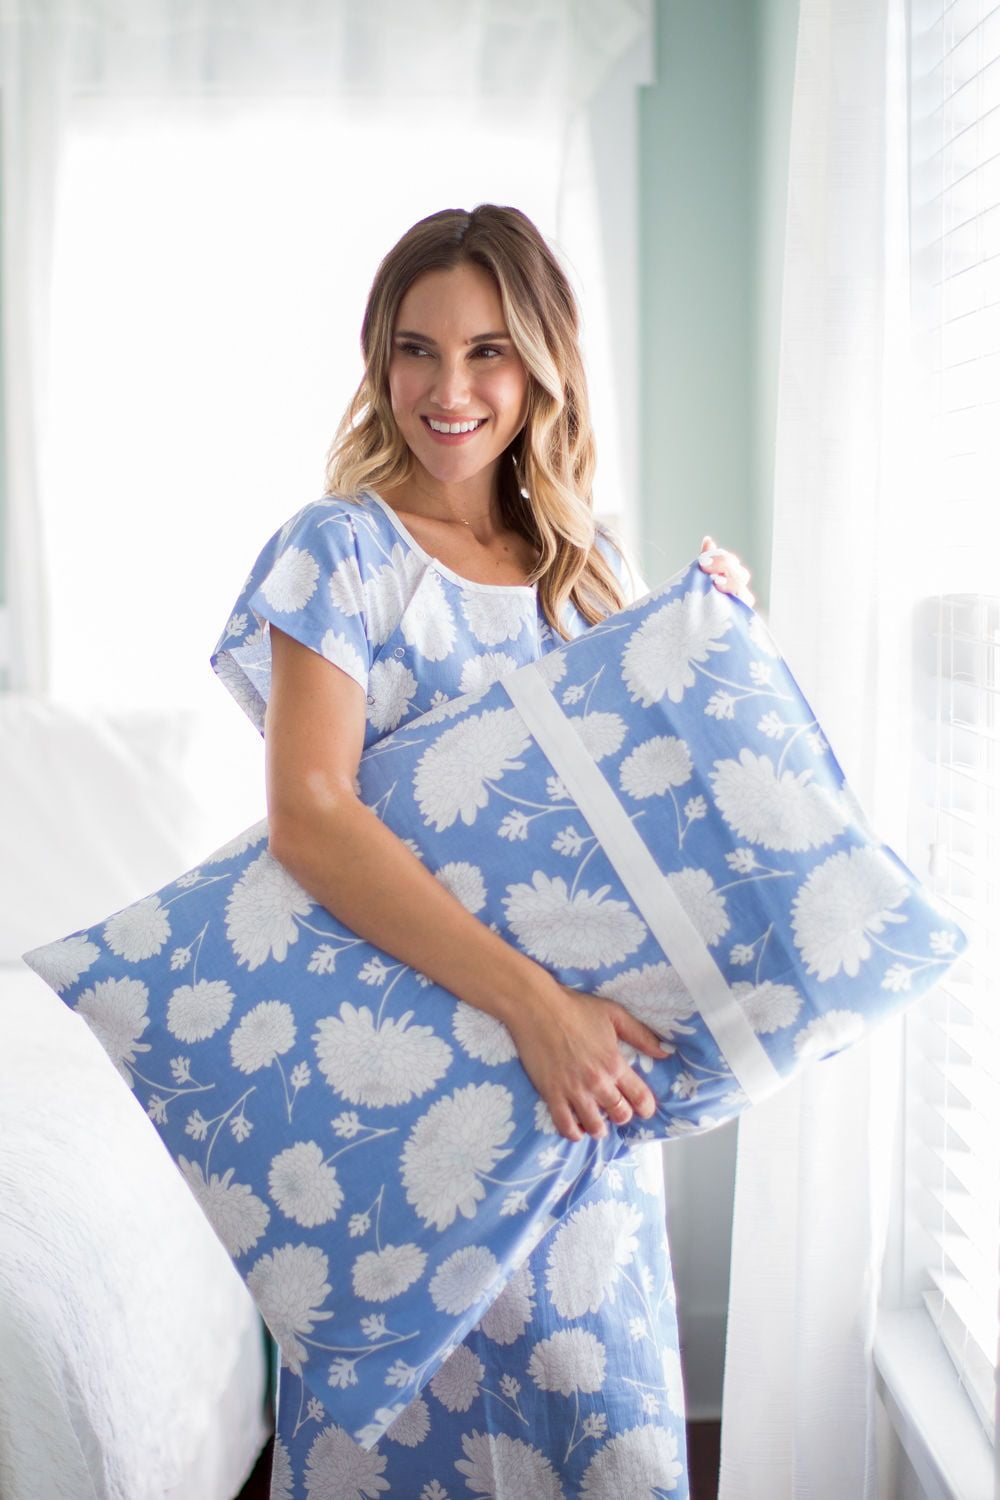 XXL prepregnancy 18-24, Nicole Gownie with Matching Pillow case Designer Hospital Gown Labor Kit Gownies